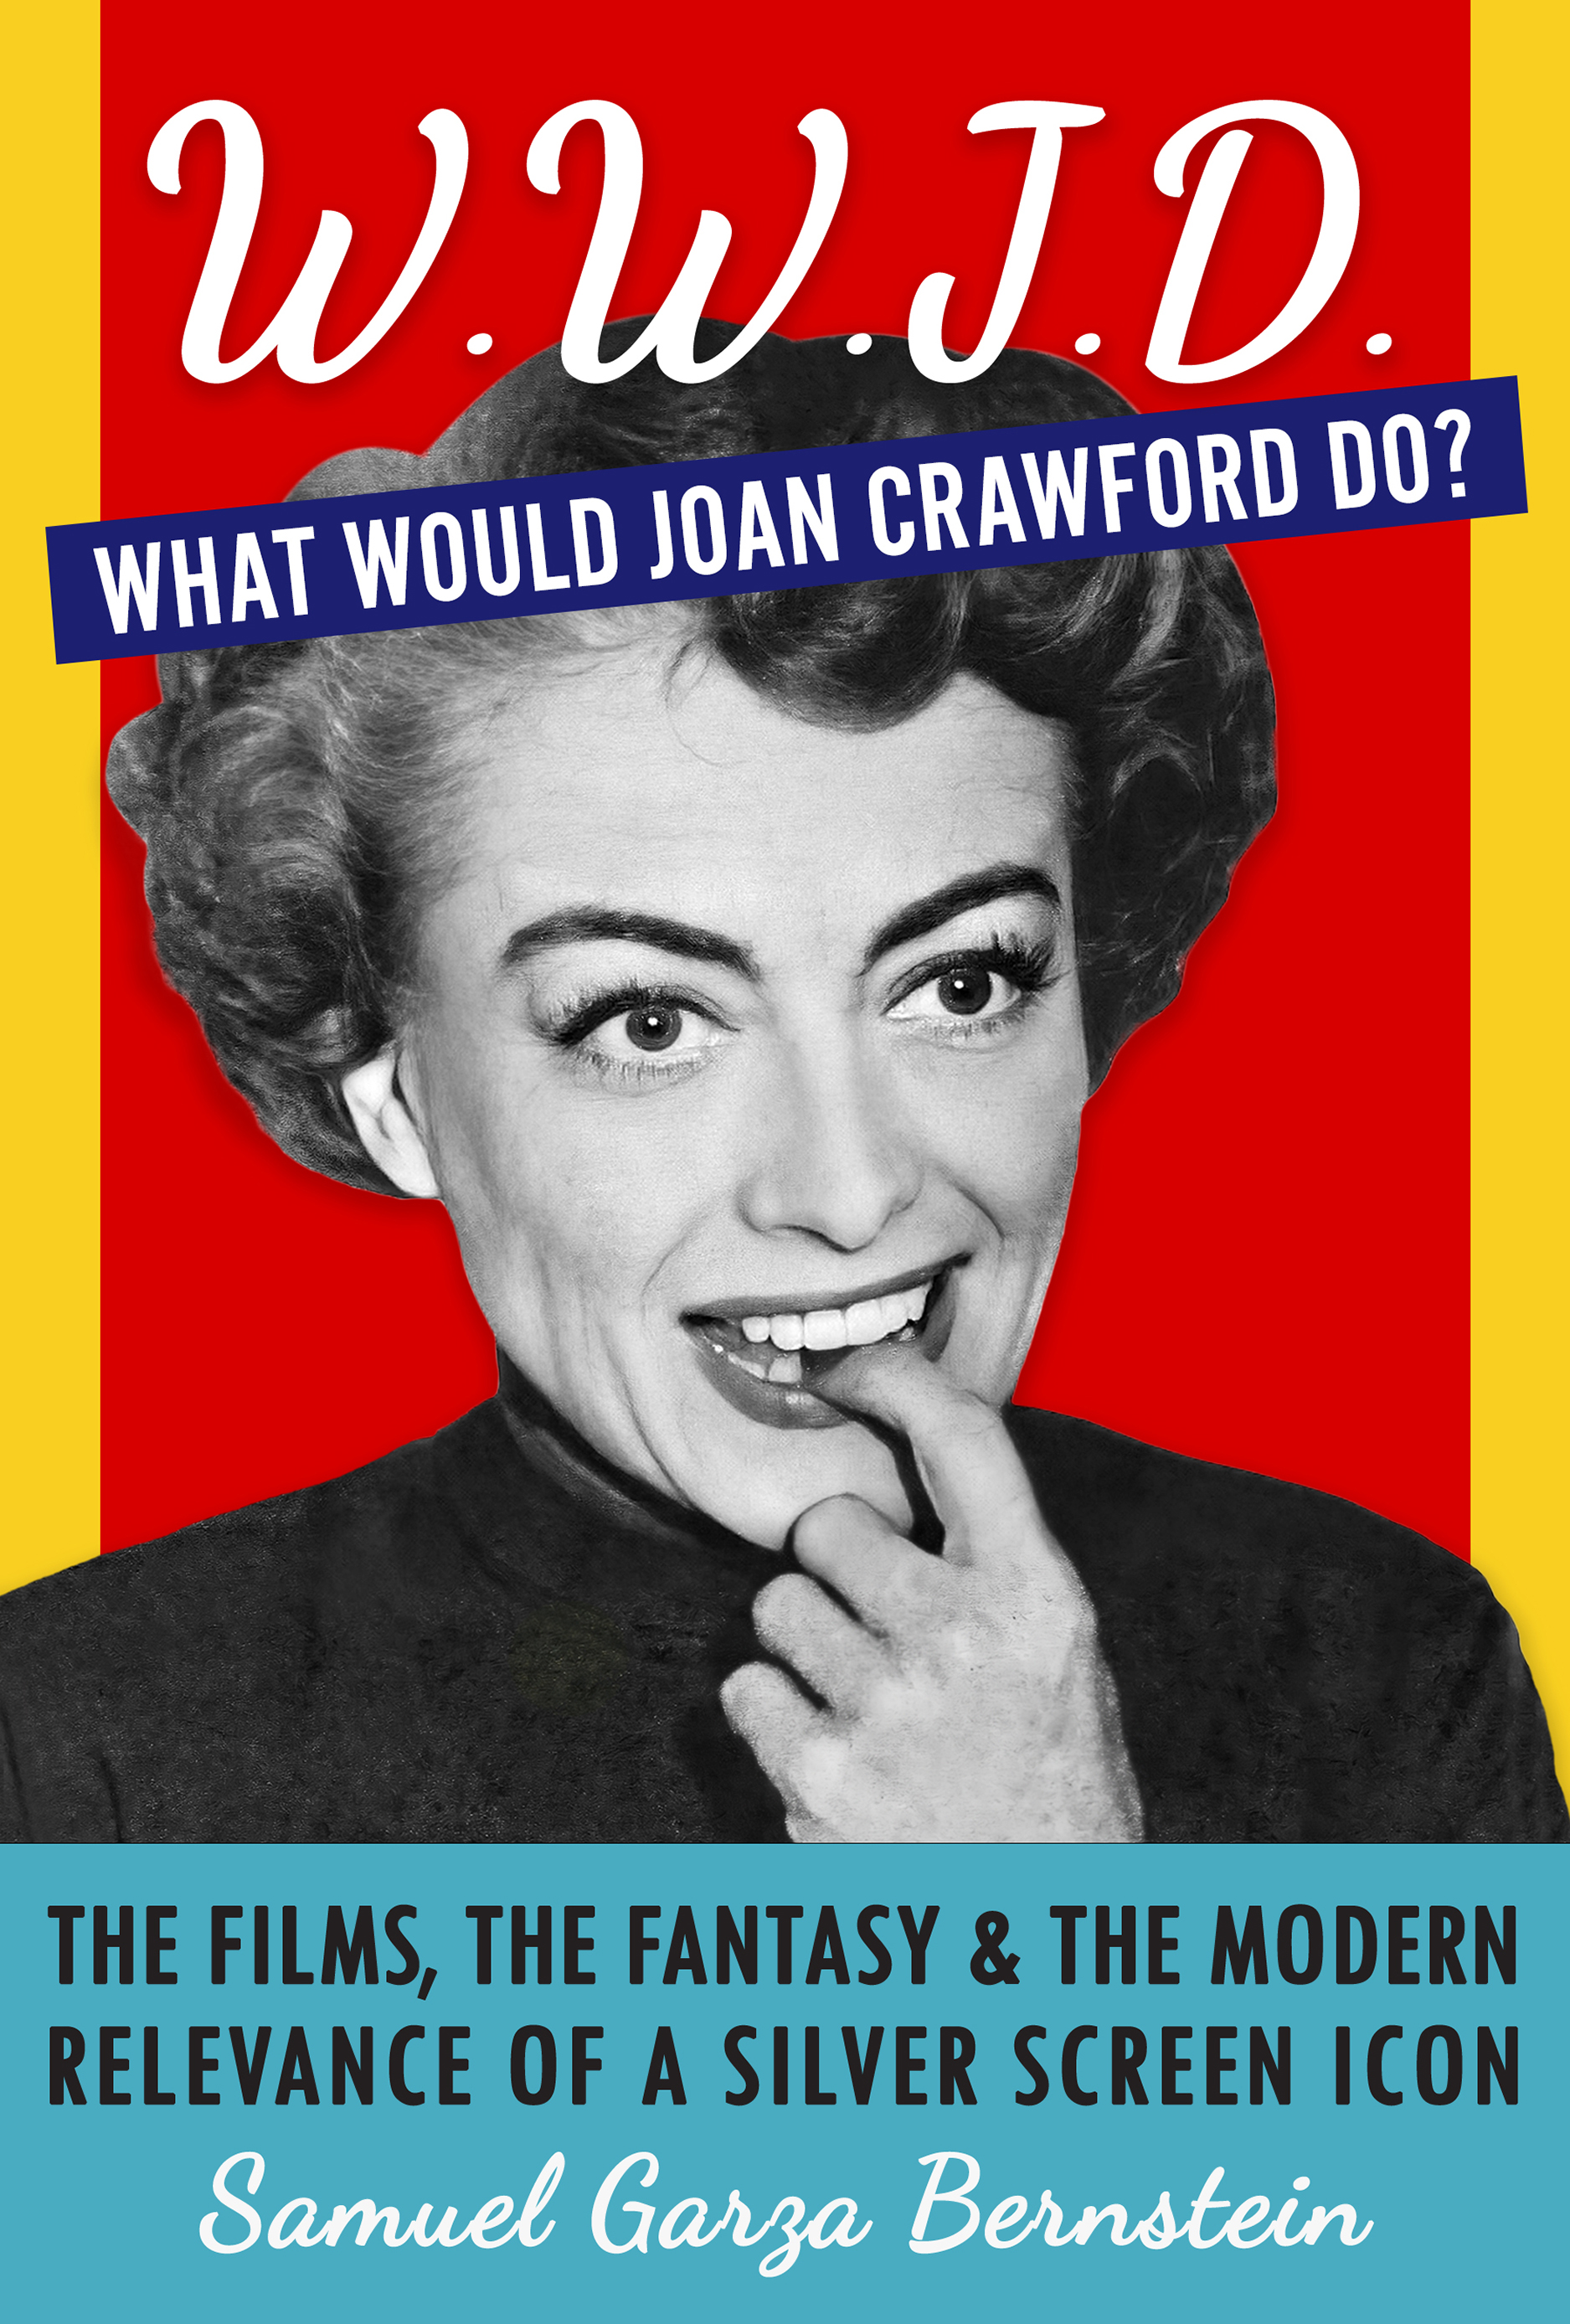 WWJD What Would Joan Crawford Do?